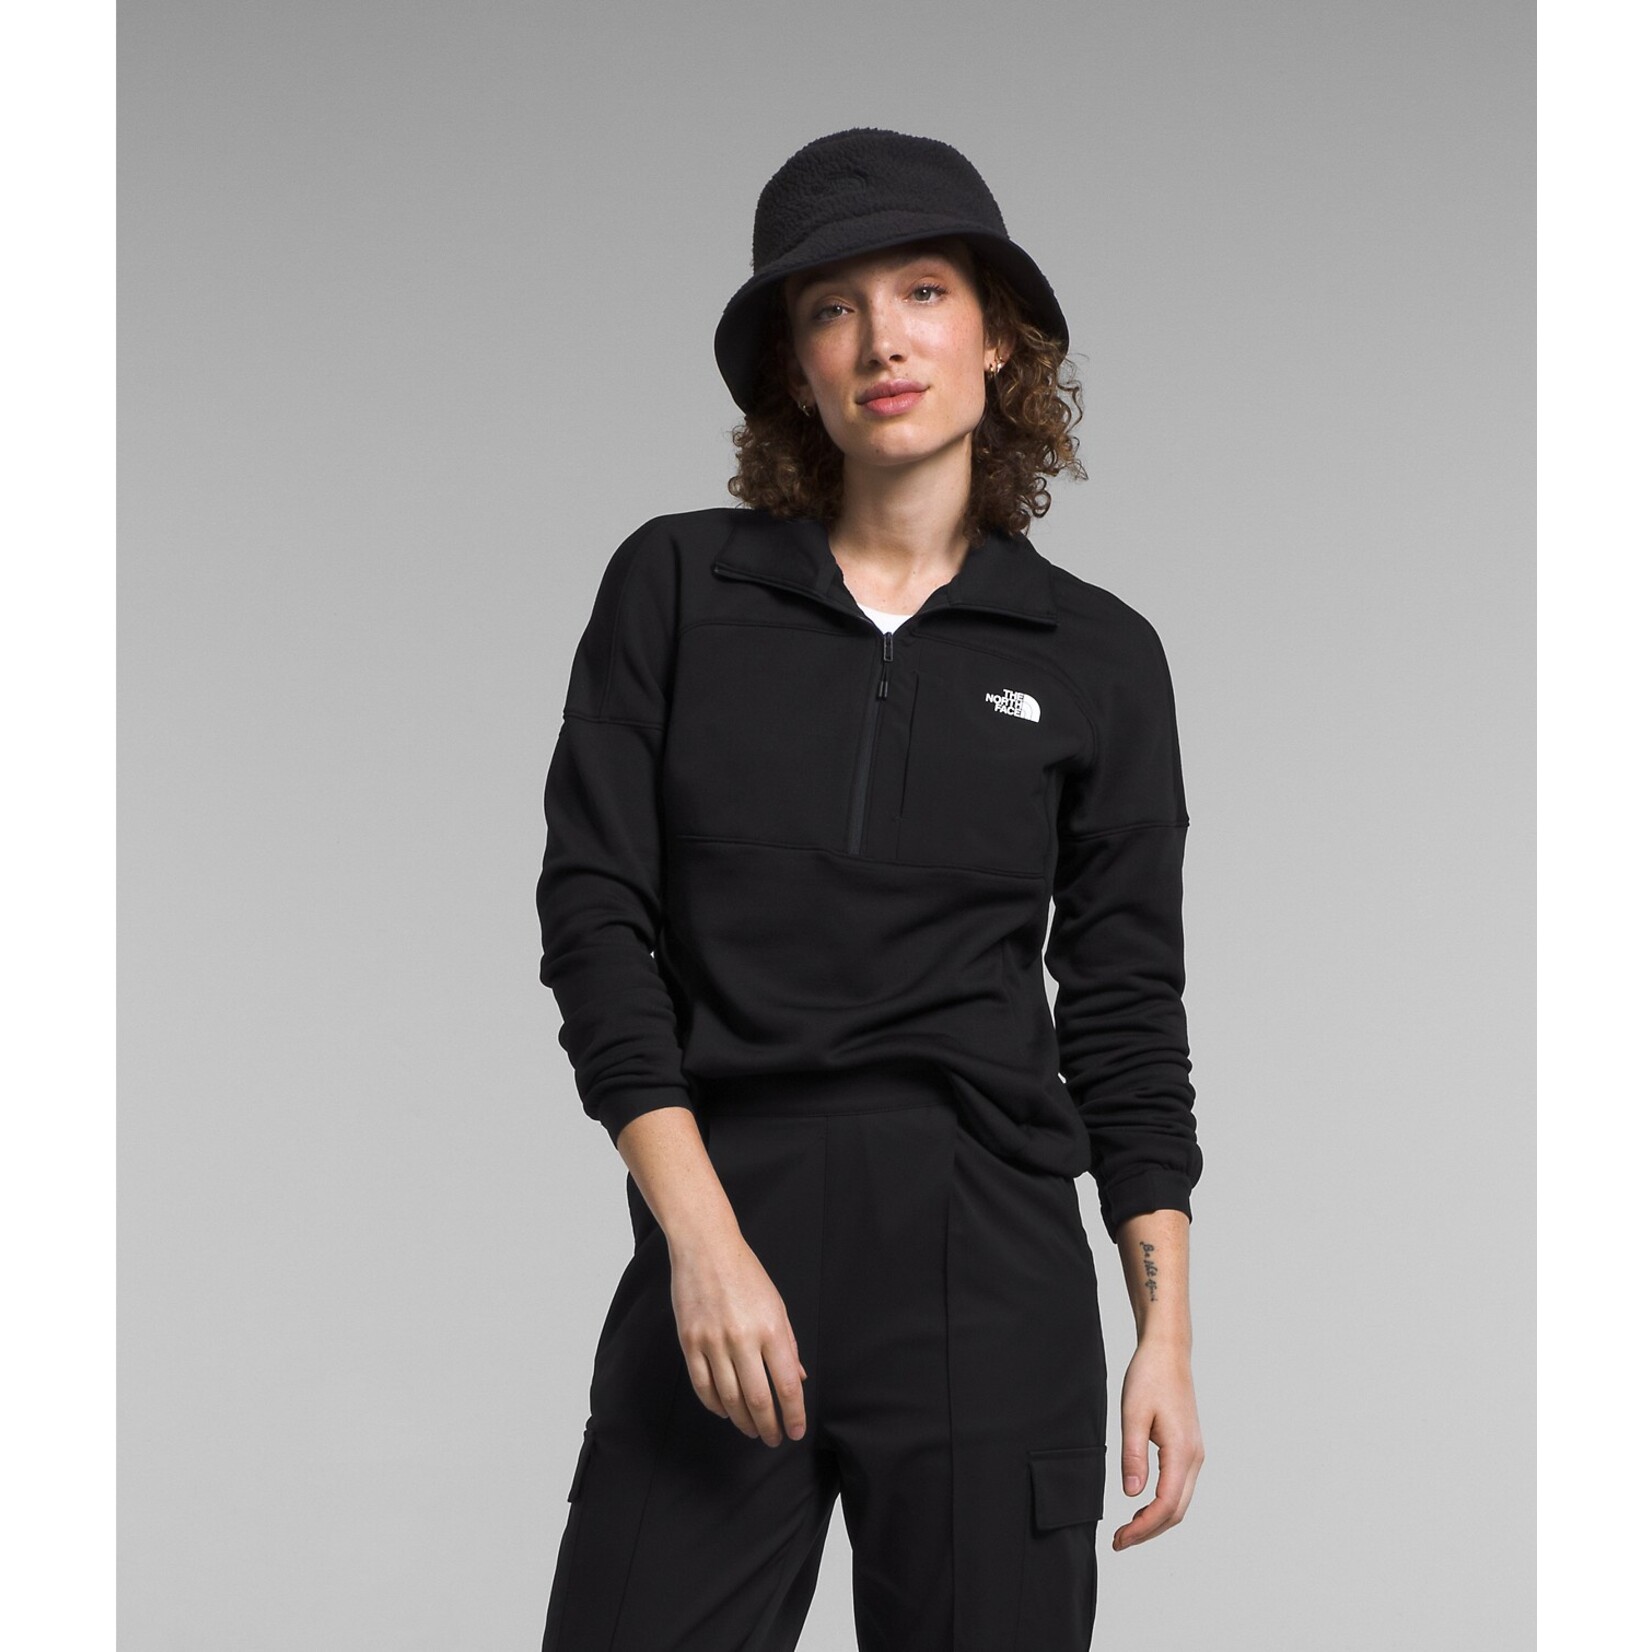 THE NORTH FACE Women's Canyonlands High Altitude ½ Zip-24